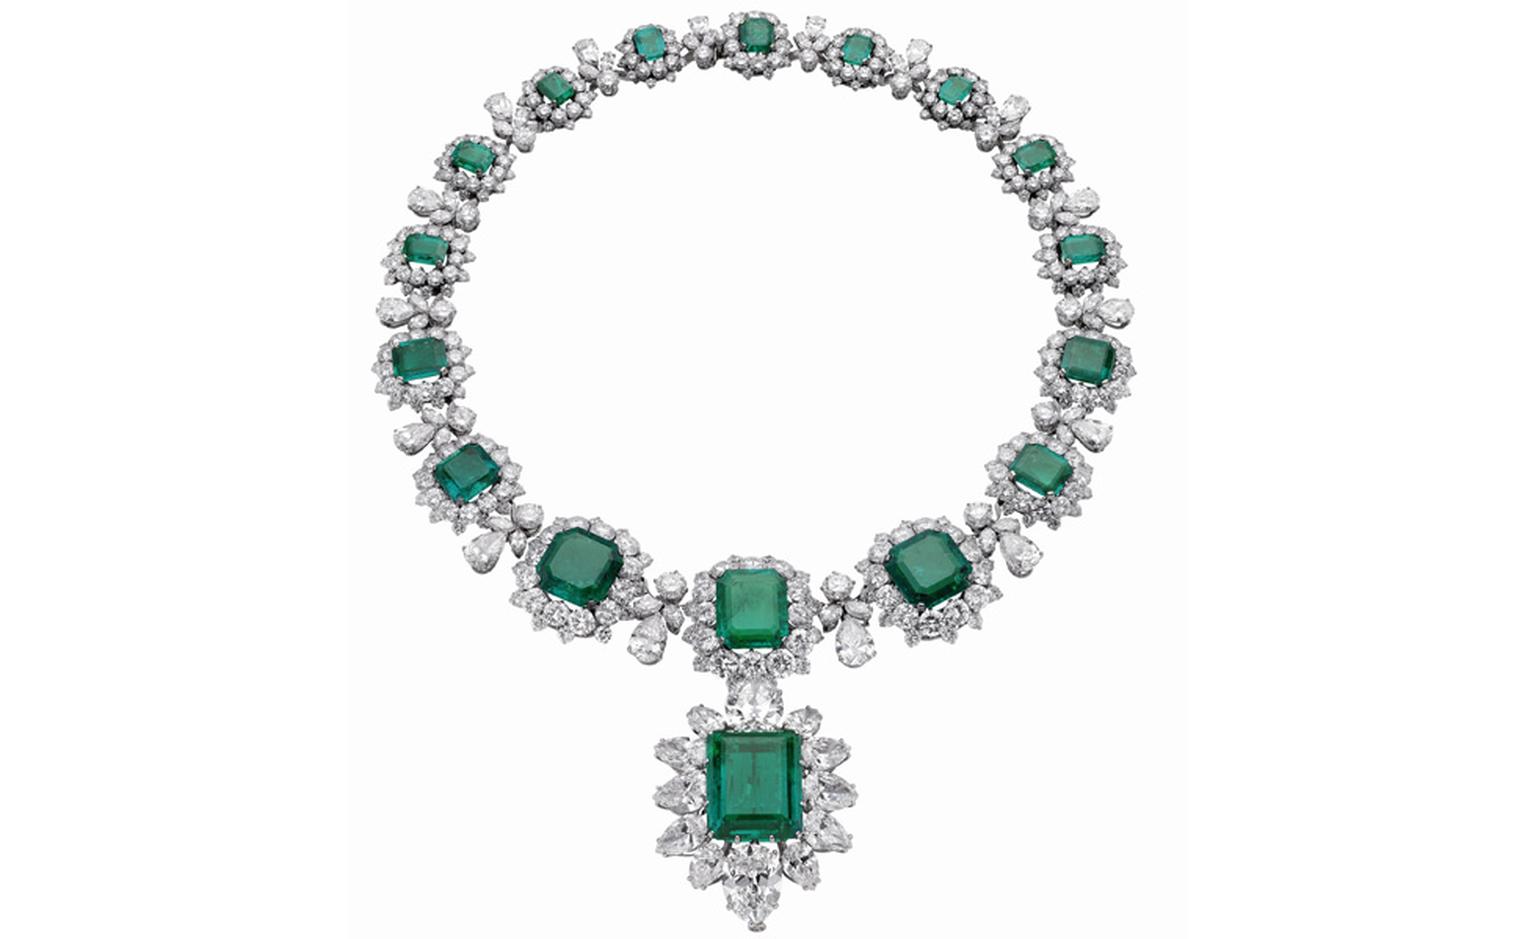 Bulgari Emerald necklace that was part of a parure by Bulgari and given to Elizabeth Taylor by Richard Burton